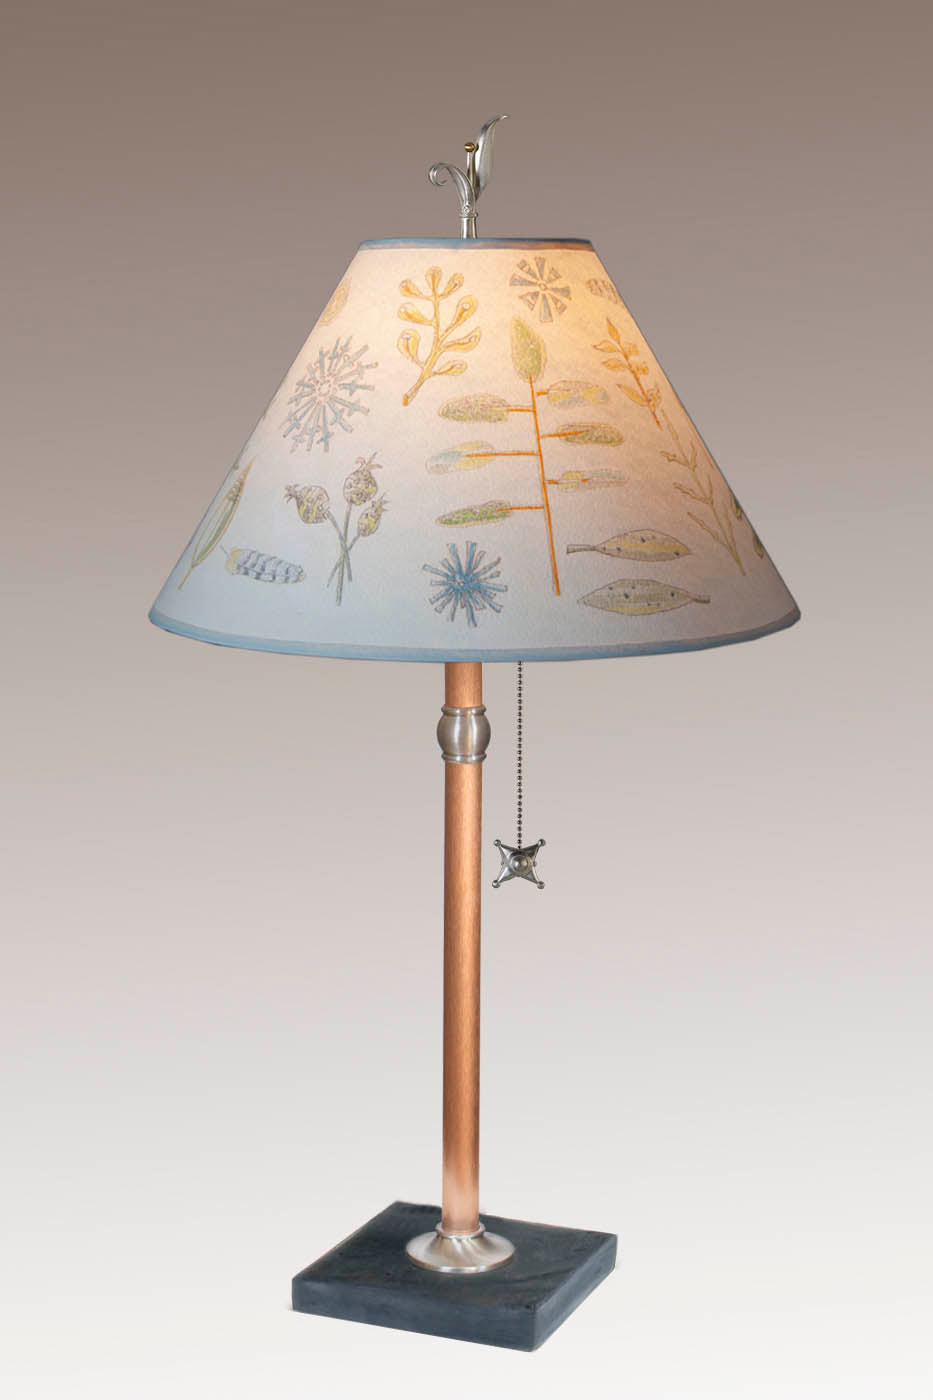 Janna Ugone & Co Table Lamp Copper Table Lamp with Medium Conical Shade in Field Chart